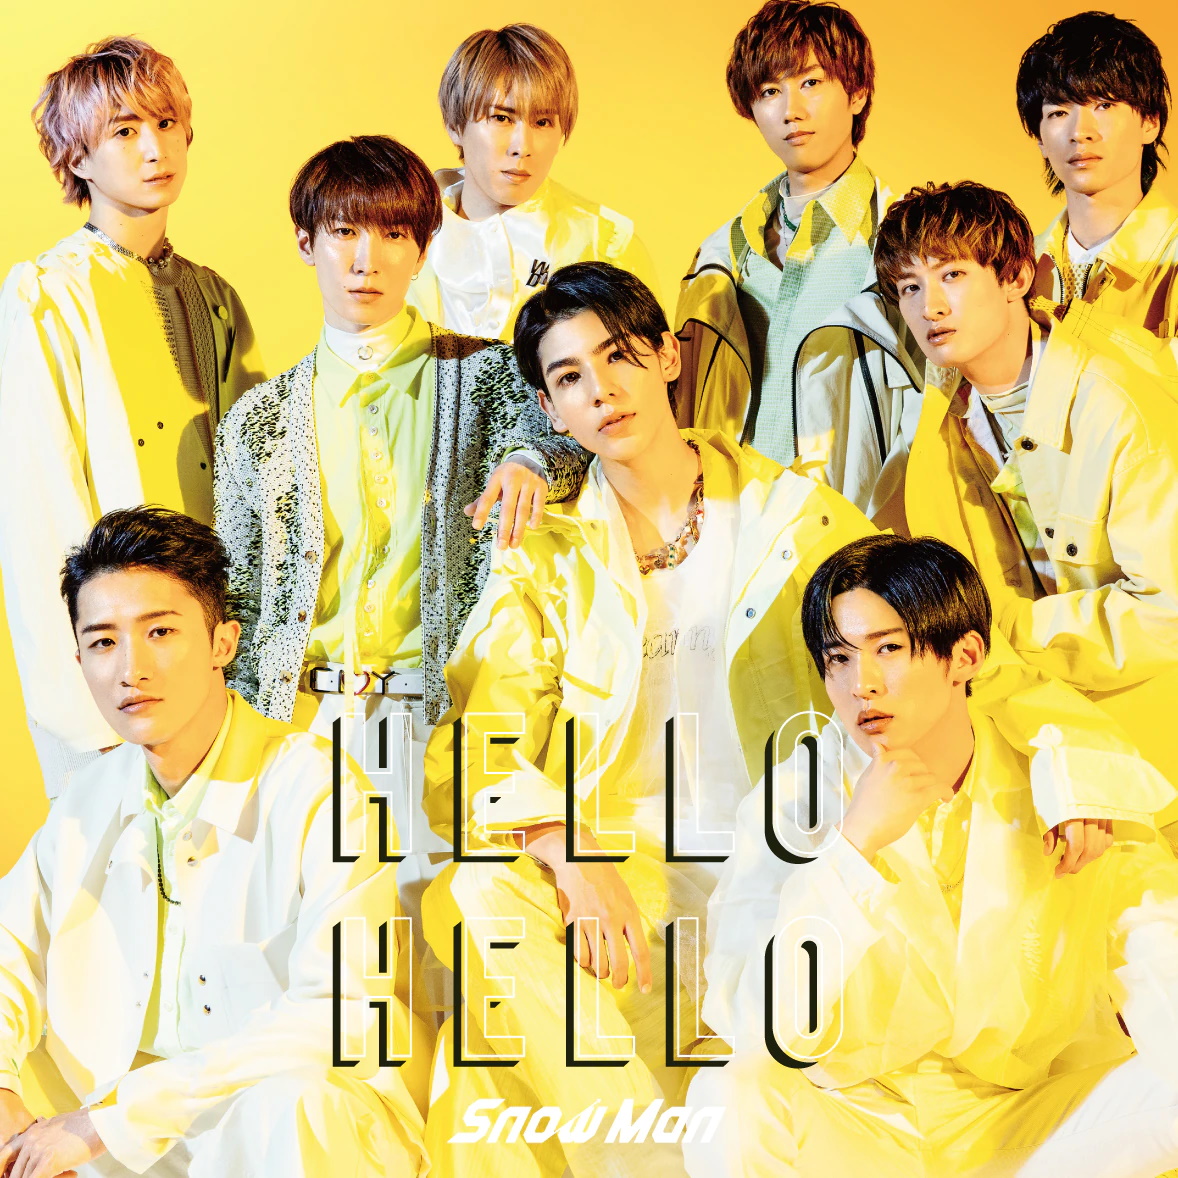 Cover for『Snow Man - HELLO HELLO』from the release『HELLO HELLO』